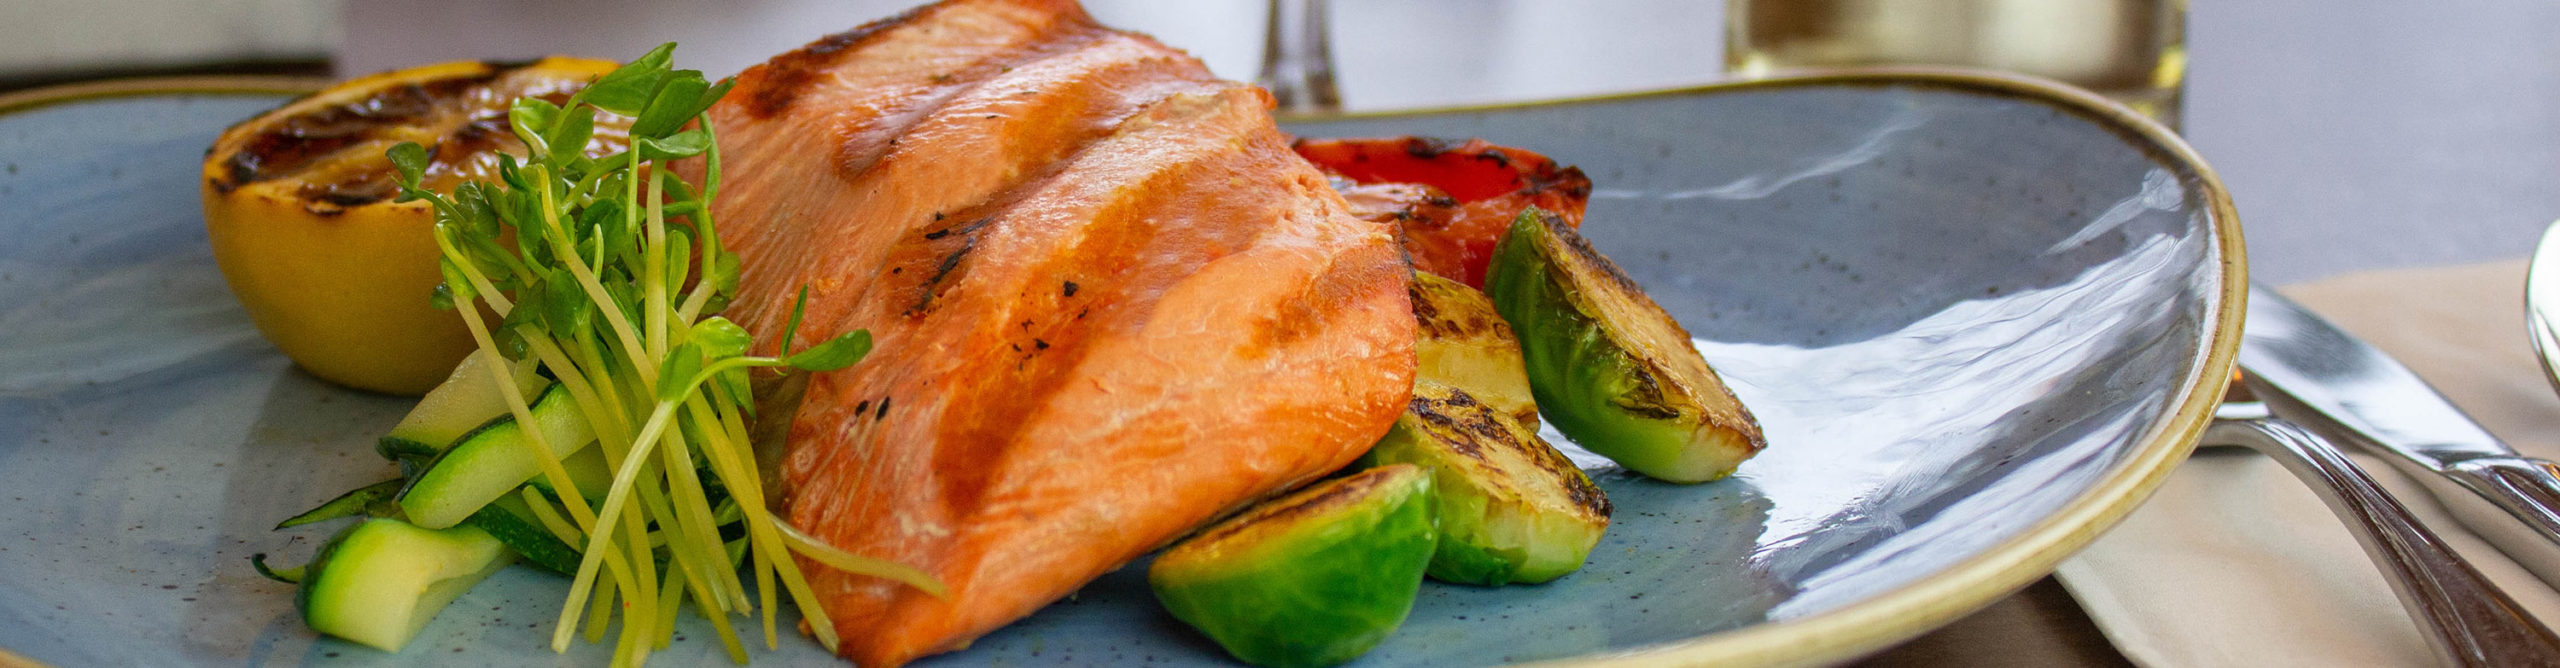 Dinner: Grilled Sockeye Salmon with Assorted Grilled Seasoned Vegetables